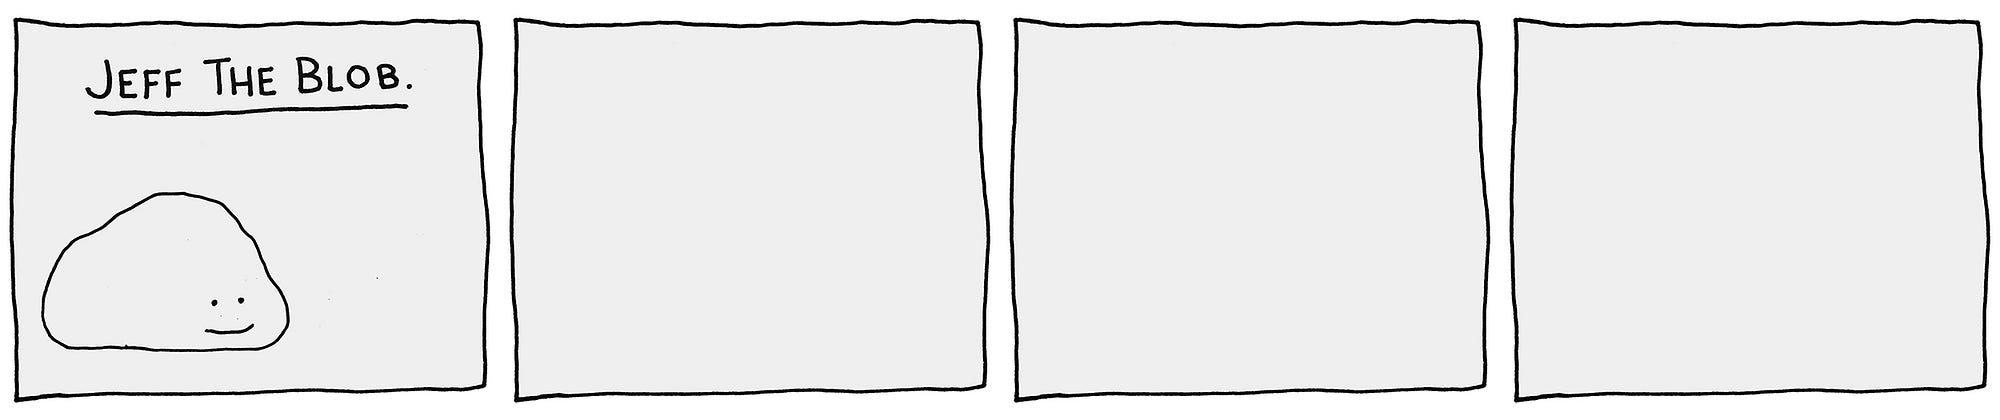 How to draw comics when you can’t actually draw. | by Chaz Hutton | Medium